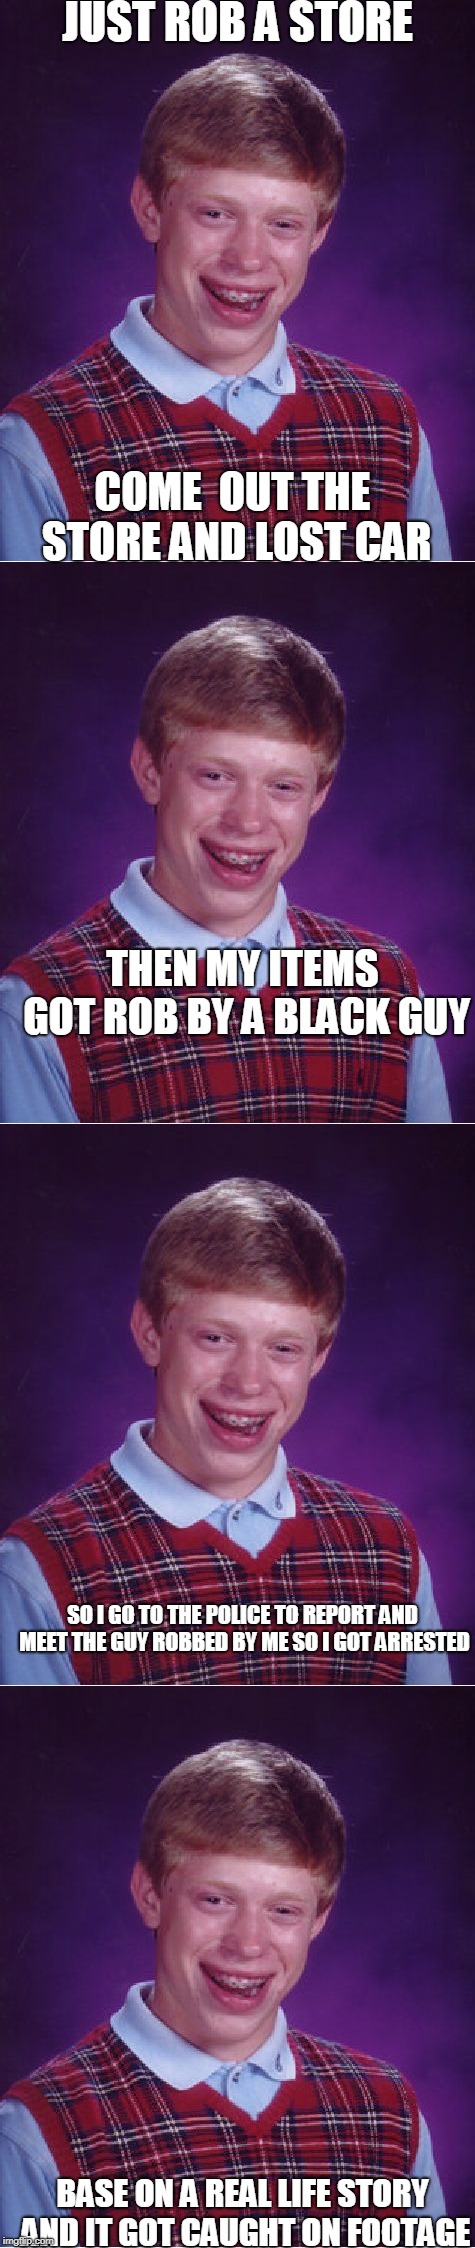 Base on a real life story... | JUST ROB A STORE; COME  OUT THE STORE AND LOST CAR; THEN MY ITEMS GOT ROB BY A BLACK GUY; SO I GO TO THE POLICE TO REPORT AND MEET THE GUY ROBBED BY ME SO I GOT ARRESTED; BASE ON A REAL LIFE STORY AND IT GOT CAUGHT ON FOOTAGE | image tagged in bad luck brian | made w/ Imgflip meme maker